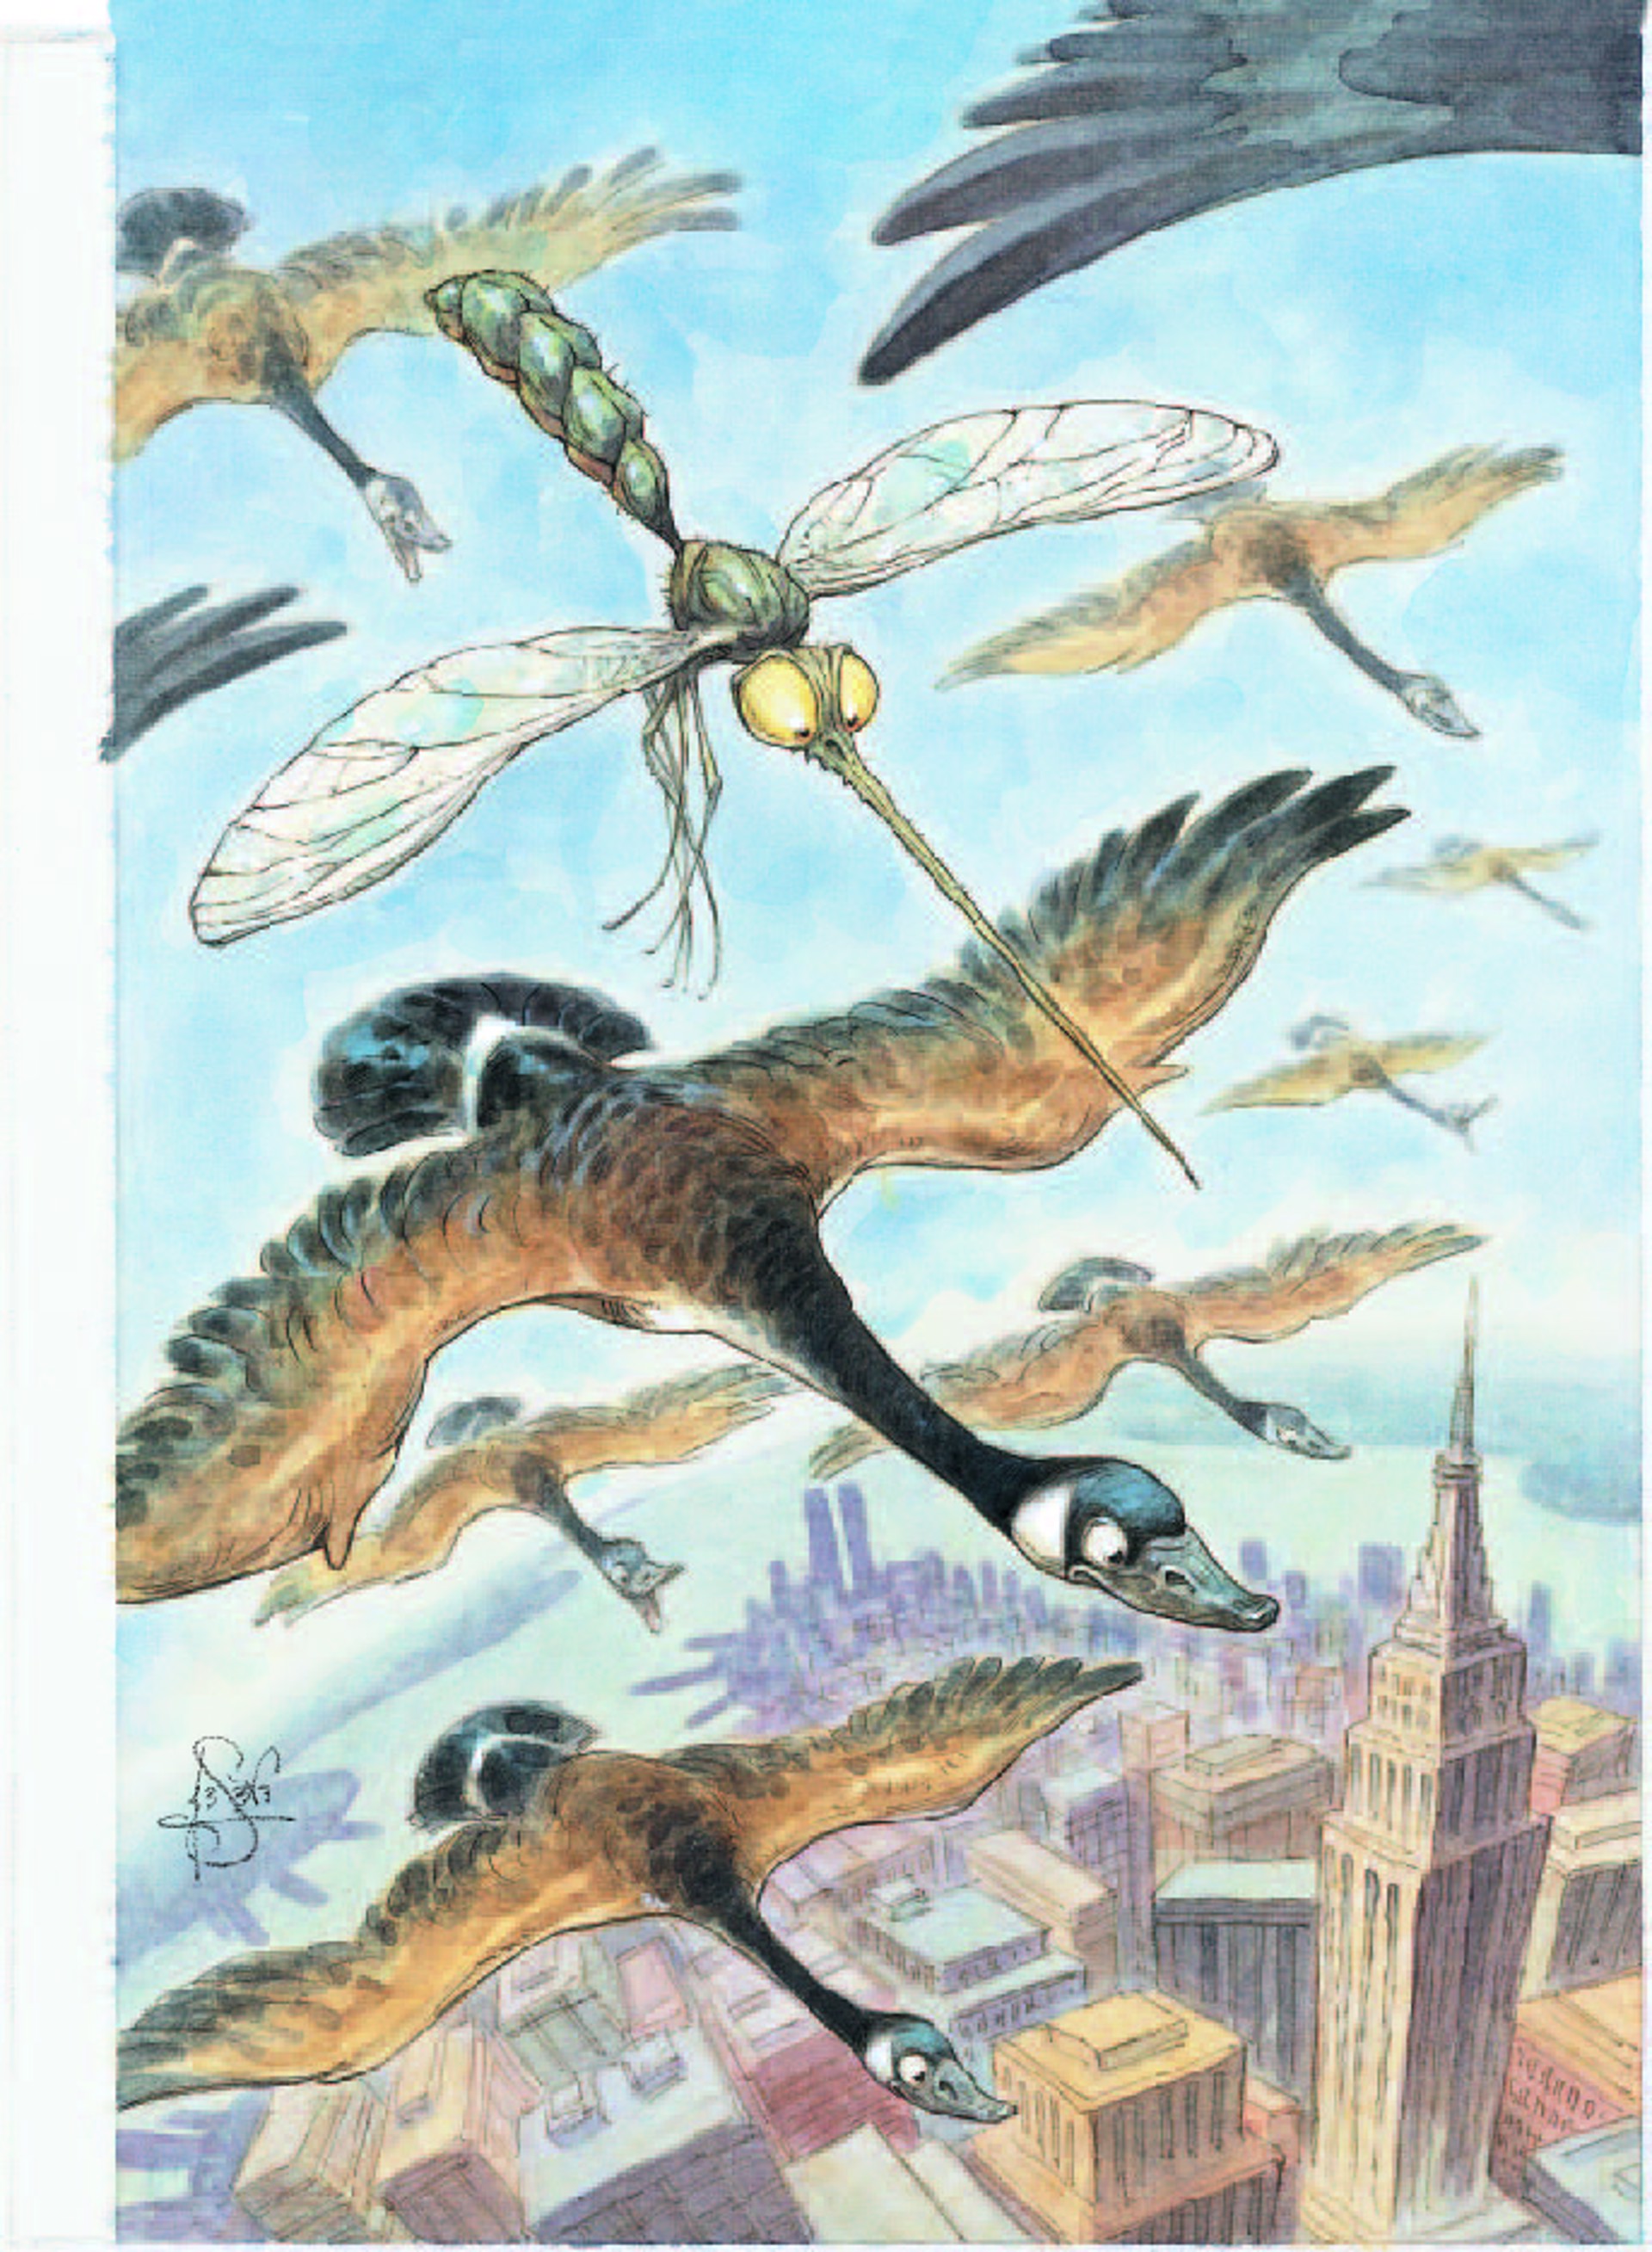 New Yorker Cover "The bite of spring" by Peter de Sève